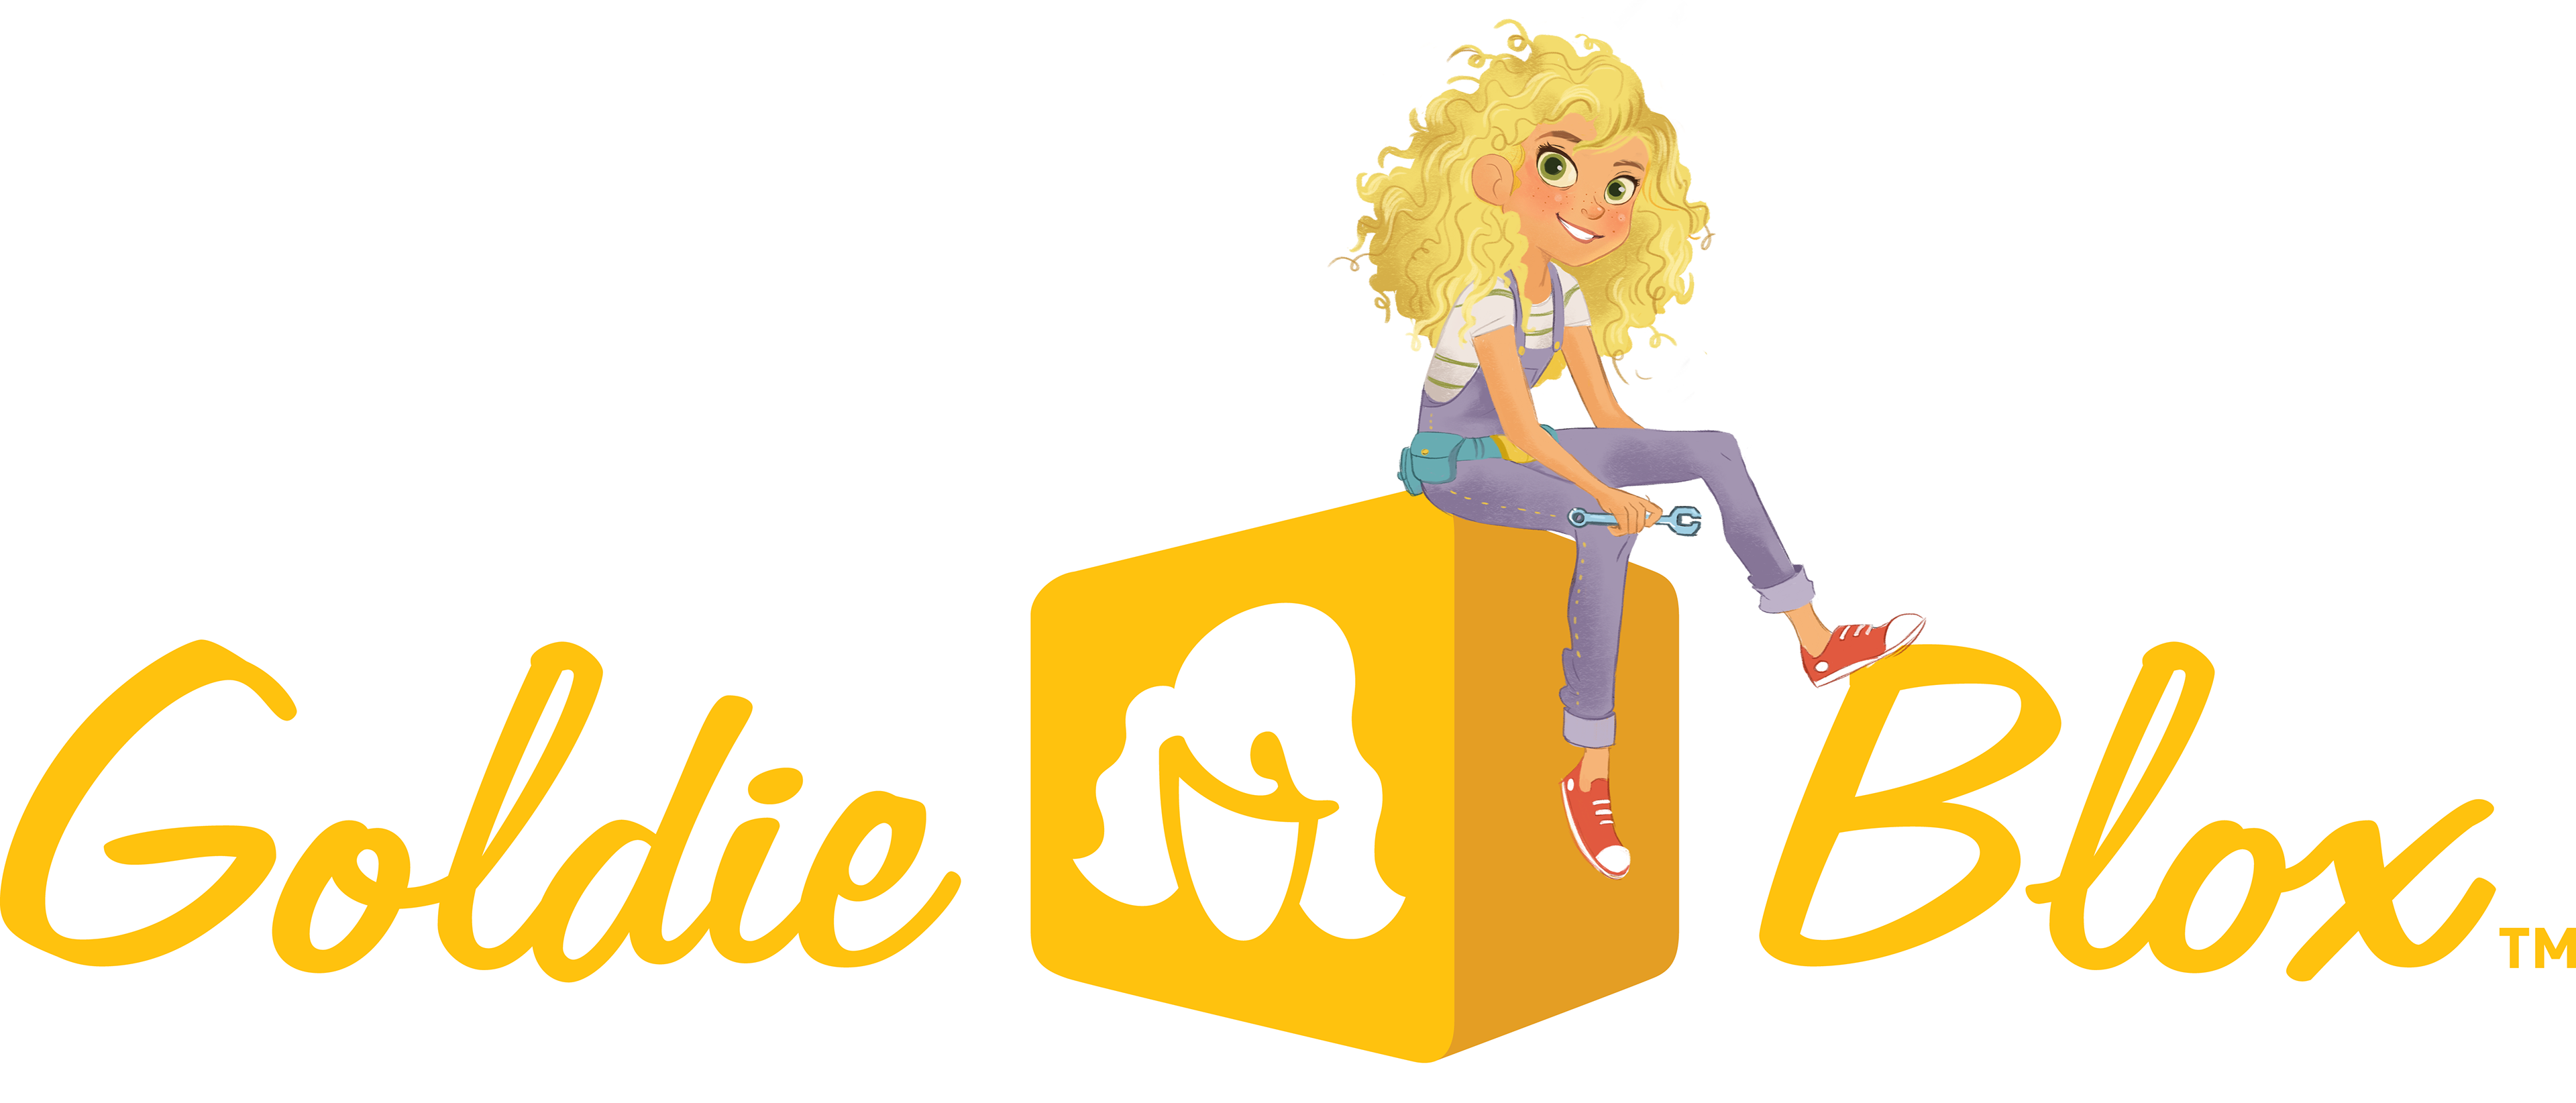 GoldieBlox story branding techniques and tips